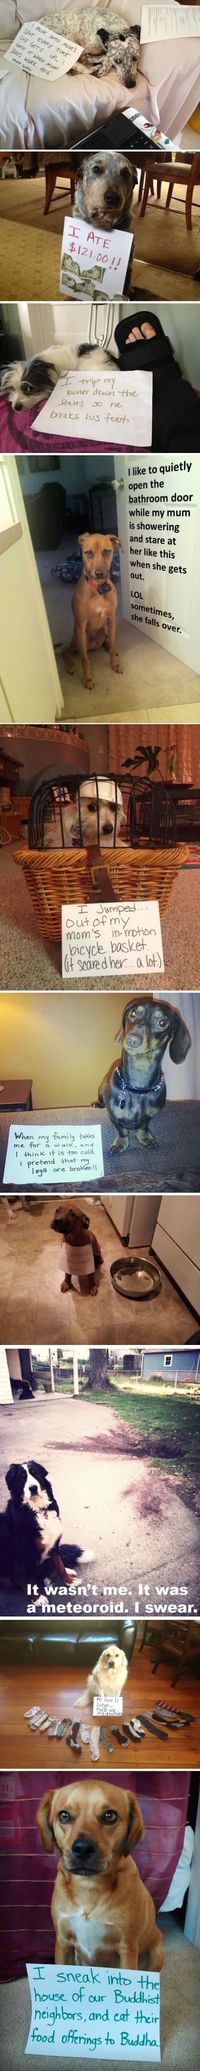 Dog shaming site --one of the joys of the Internet (Don't think any dogs were hurt in the production of these photos)